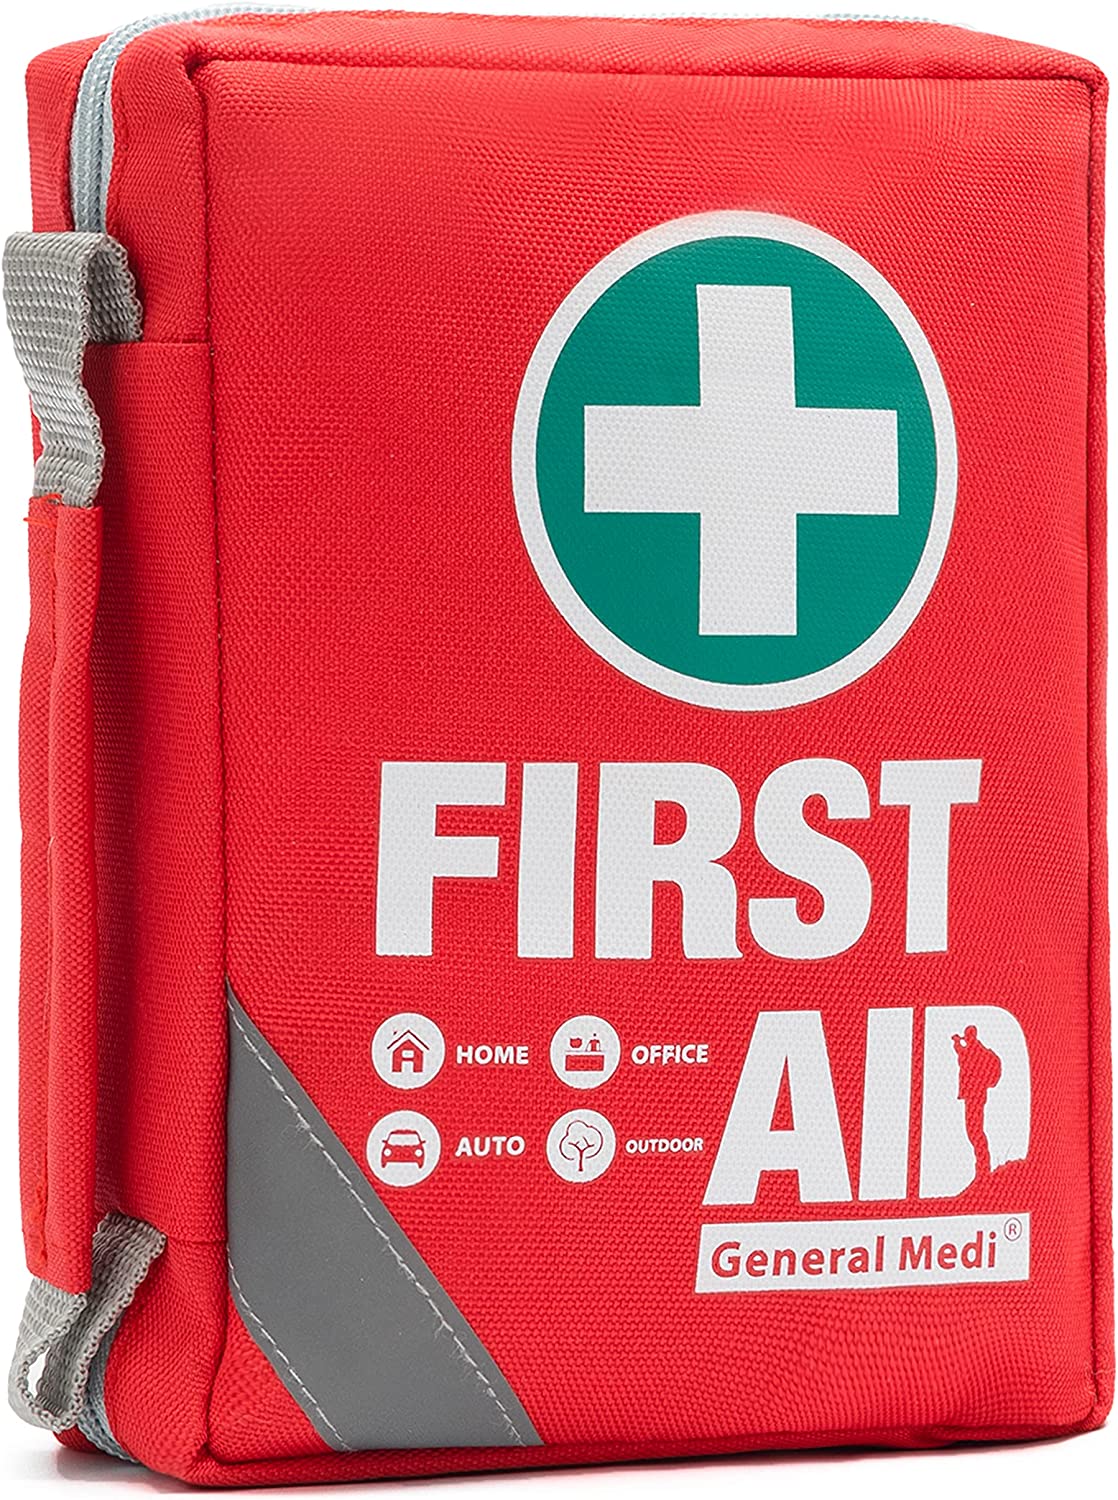 First Aid Kit – Small Compact First Aid Kit Bag(175 Piece) – Reflective Bag Design- Includes 2 x Eyewash, Instant Cold Pack, CPR Respirator, Emergency Blanket for Travel, Home, Office, Vehicle,Camping